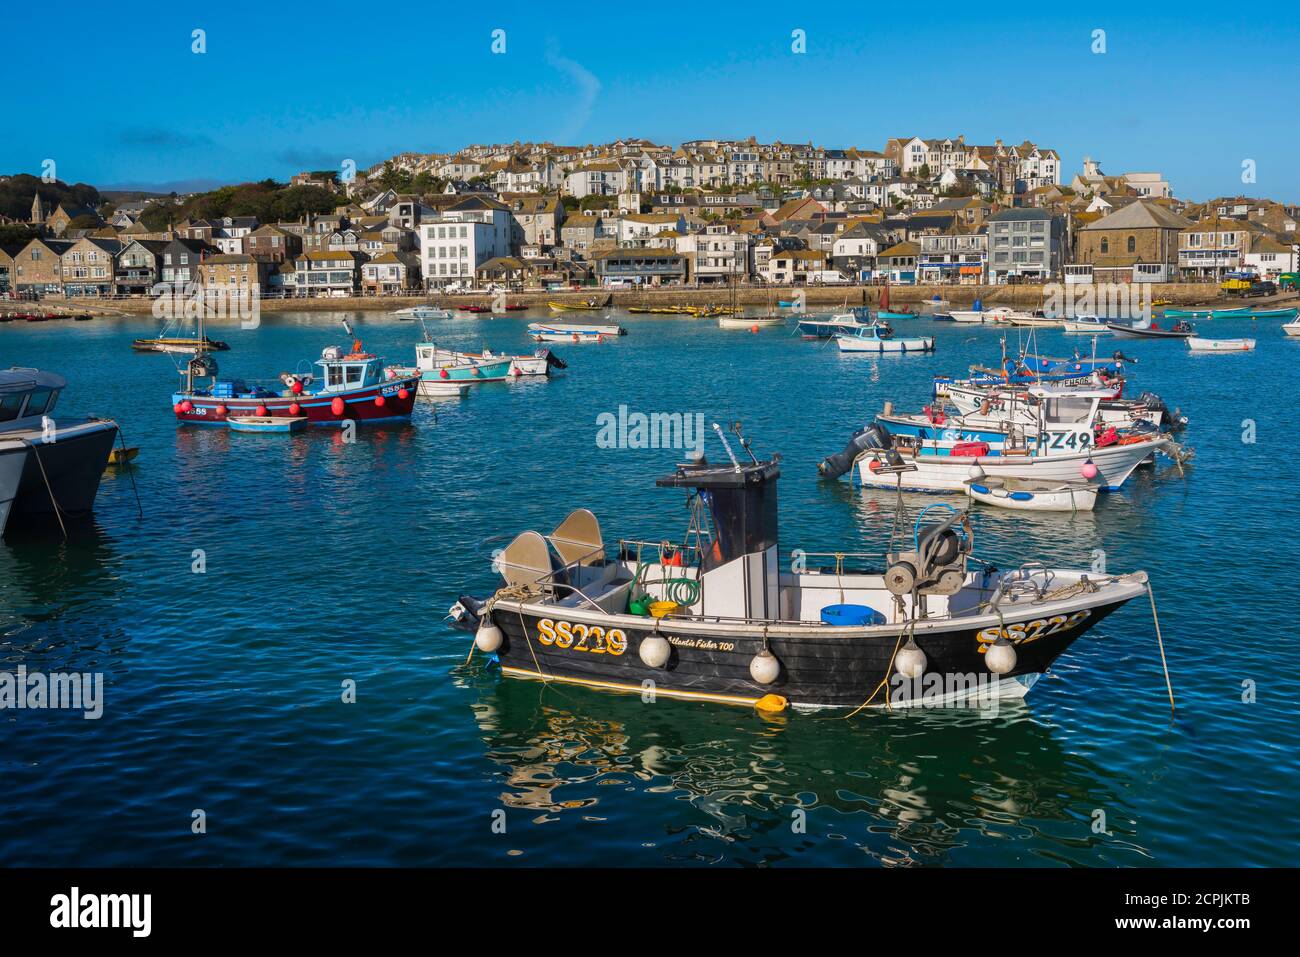 UK fishing town, view in summer of fishing boats moored in St Ives harbour, Cornwall, south west England, UK Stock Photo